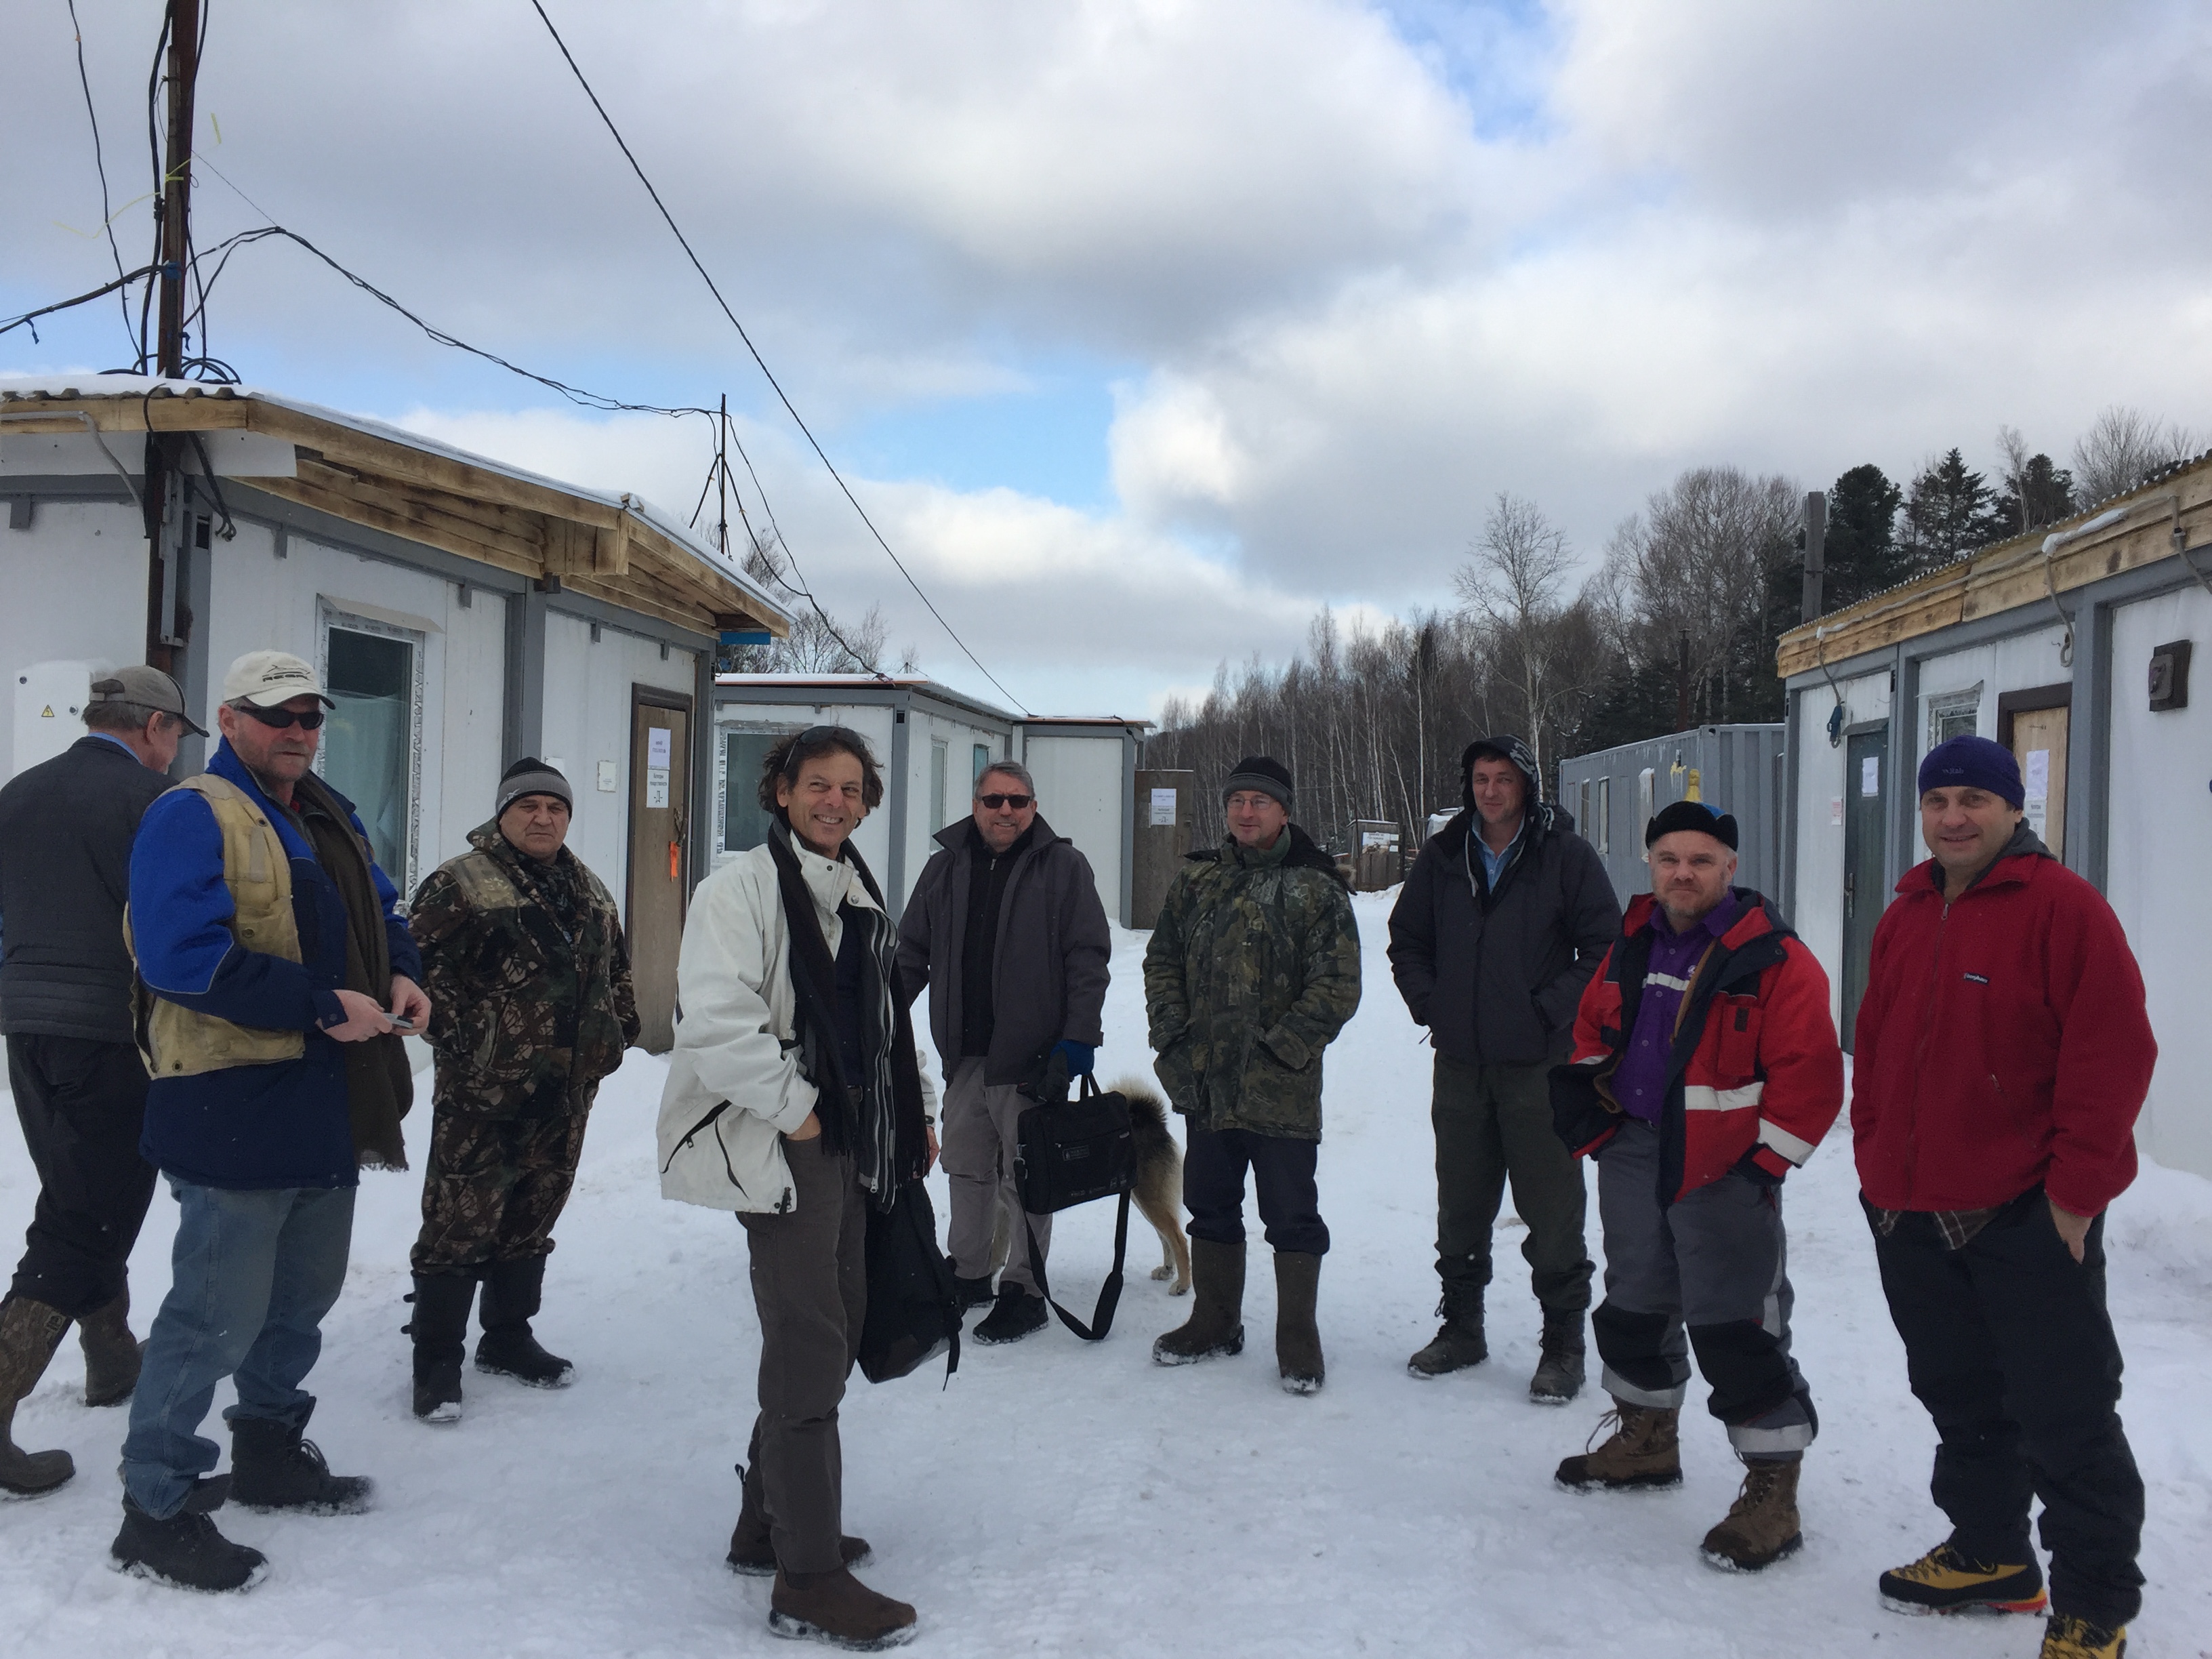 IGC's crew and visitors at the Malmyzh copper-gold project in Far East Russia. Photo by Salma Tarikh.